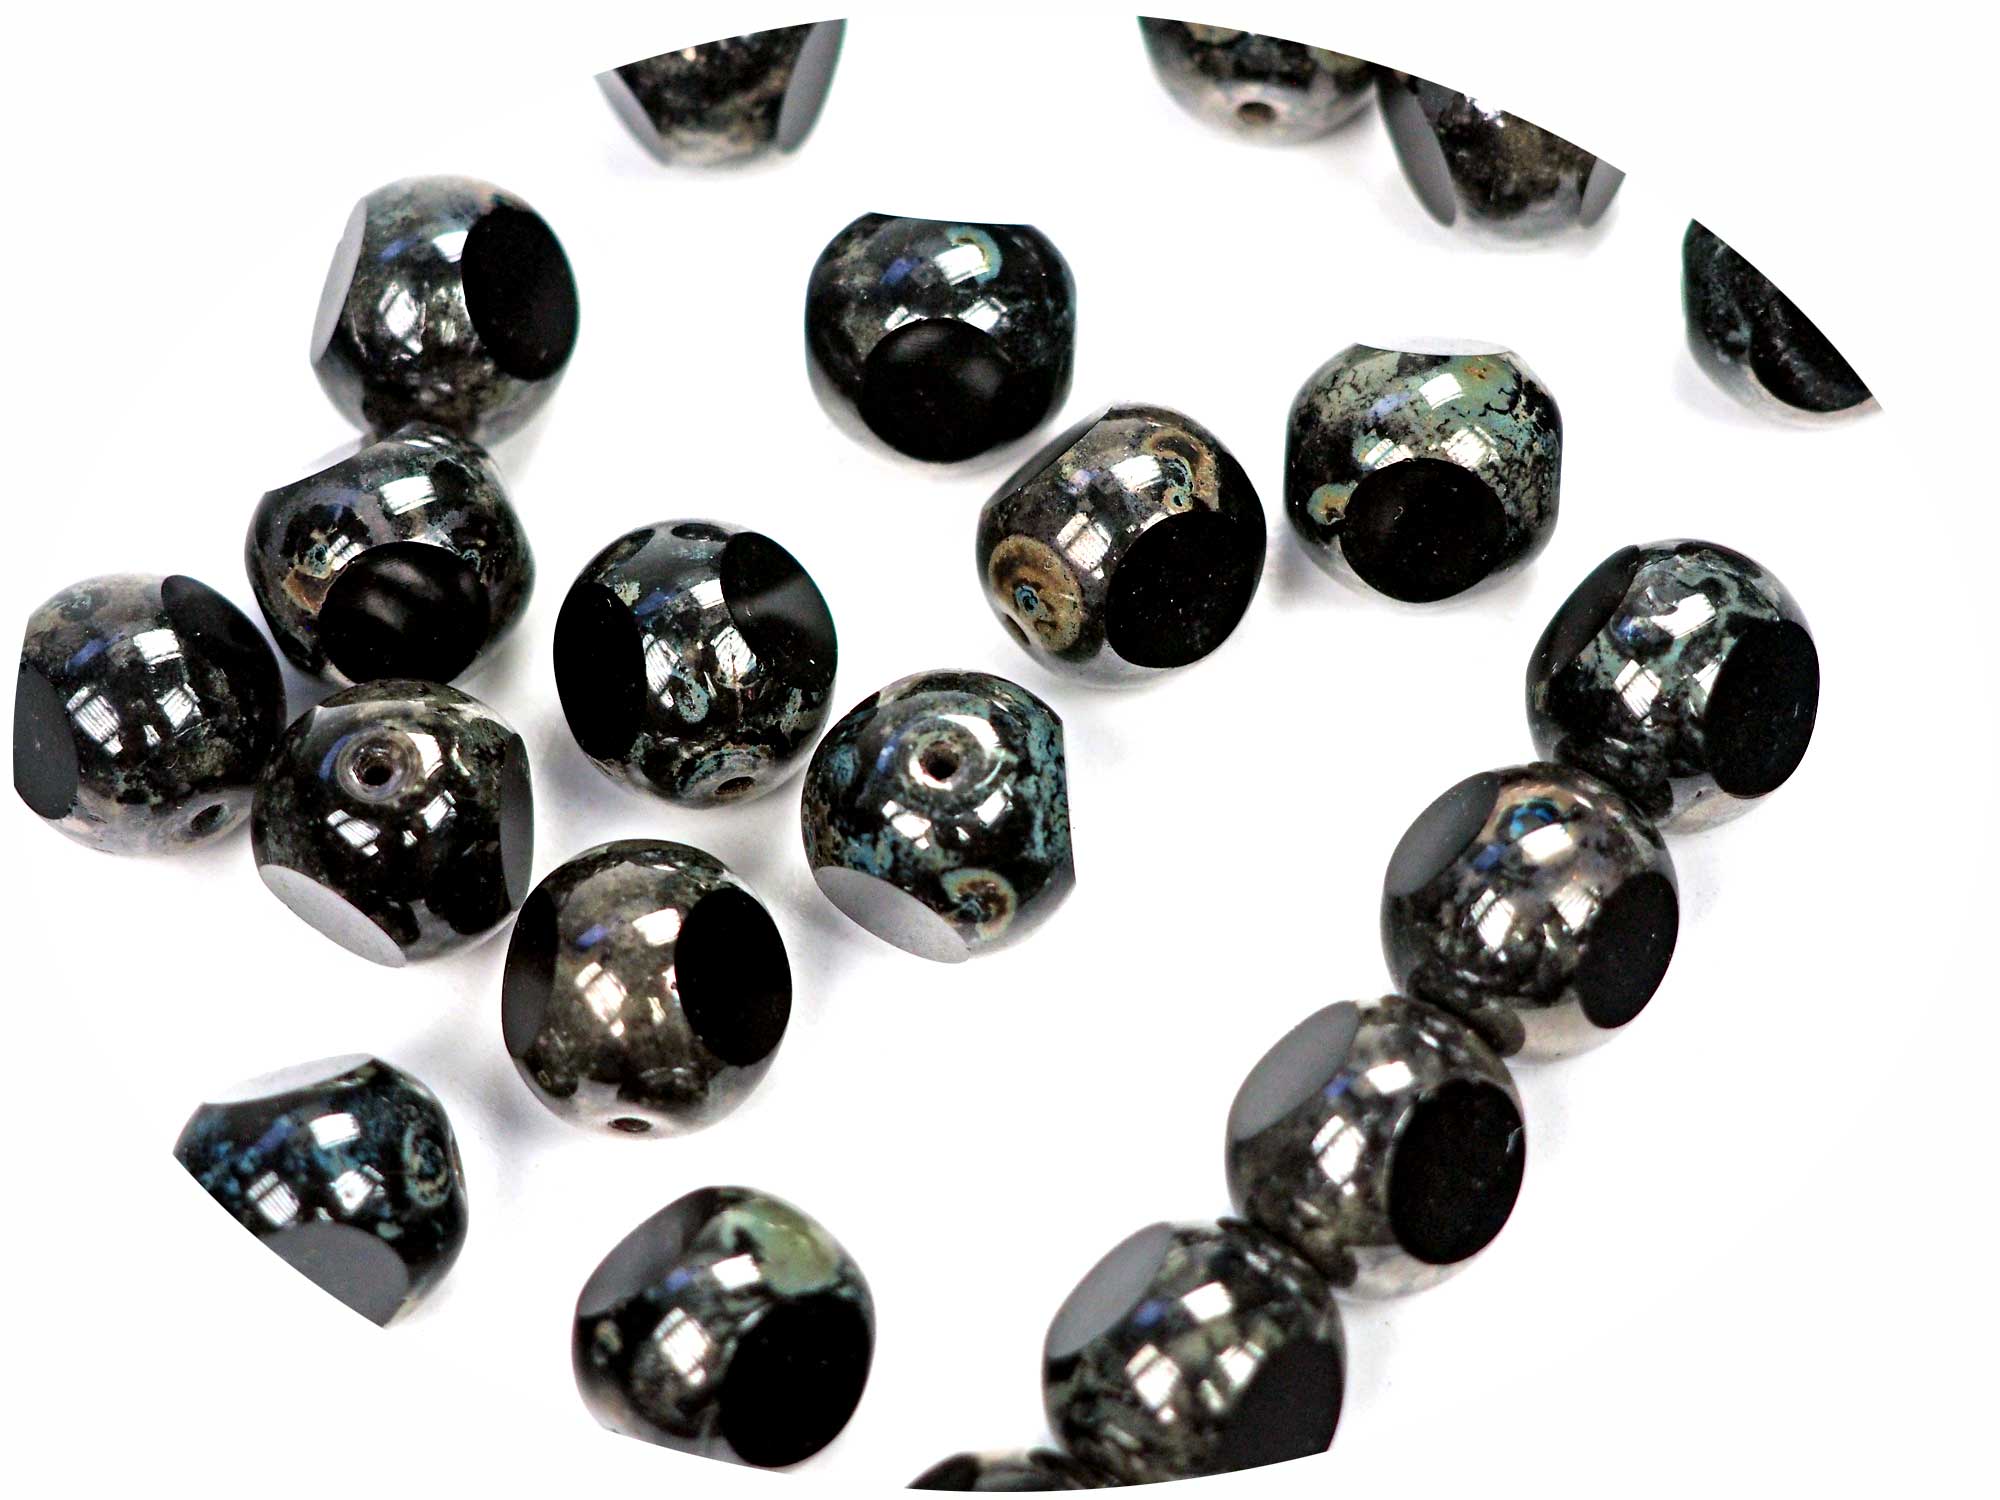 Czech Glass 3-Cut Round Window Beads (Soccer Ball Bead) Art. 151-19501 in size 12mm, Jet black with Picasso coating, 12pcs, P884